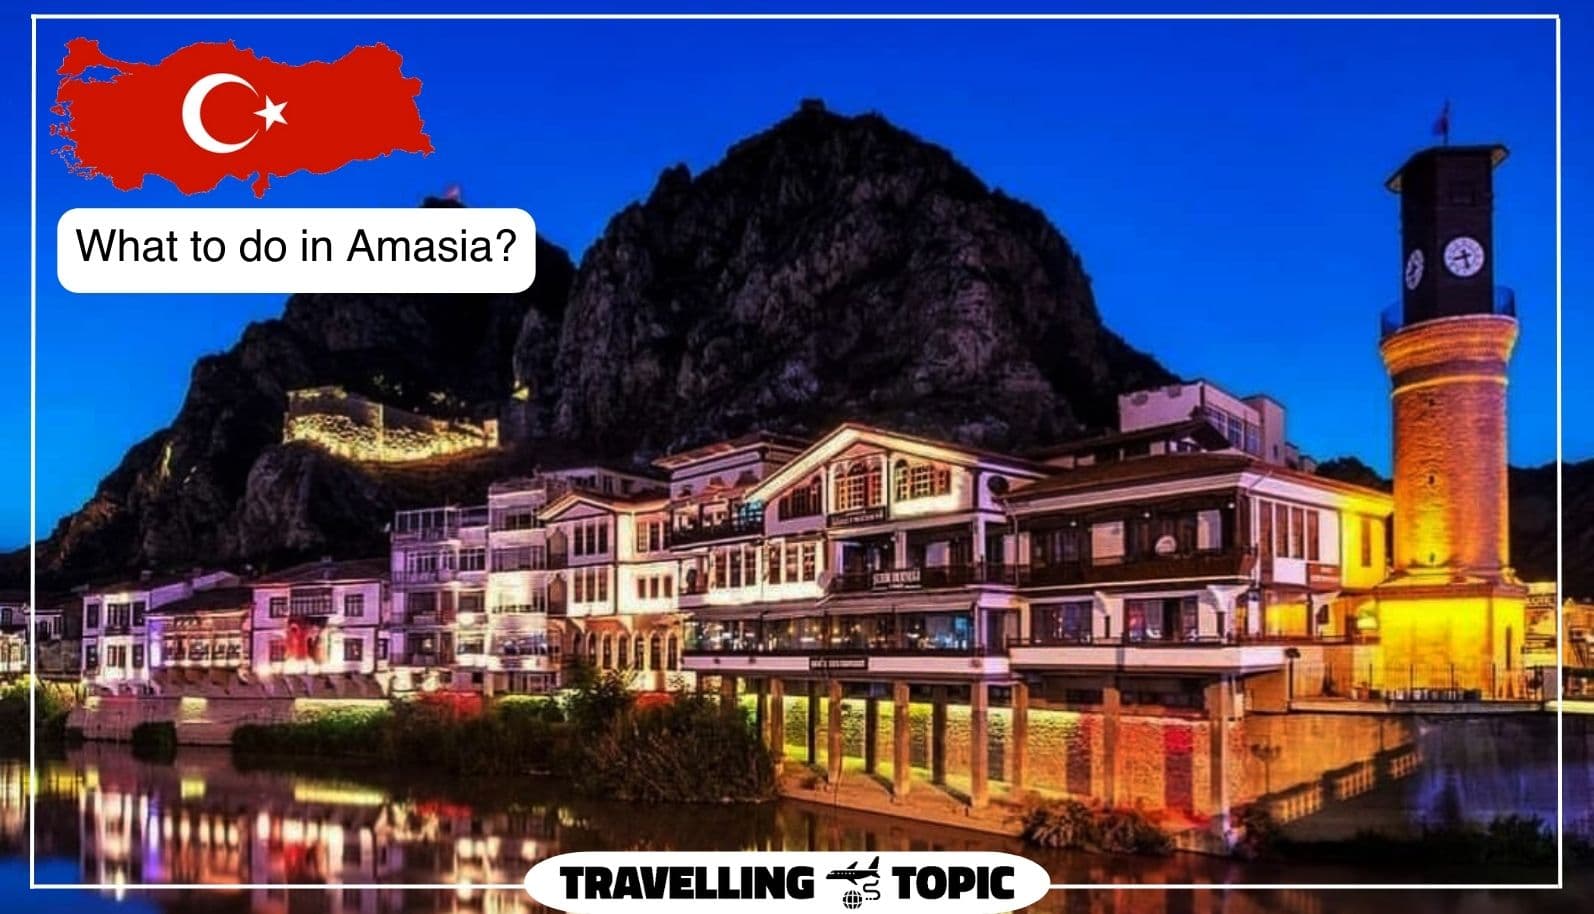 What to do in Amasia?